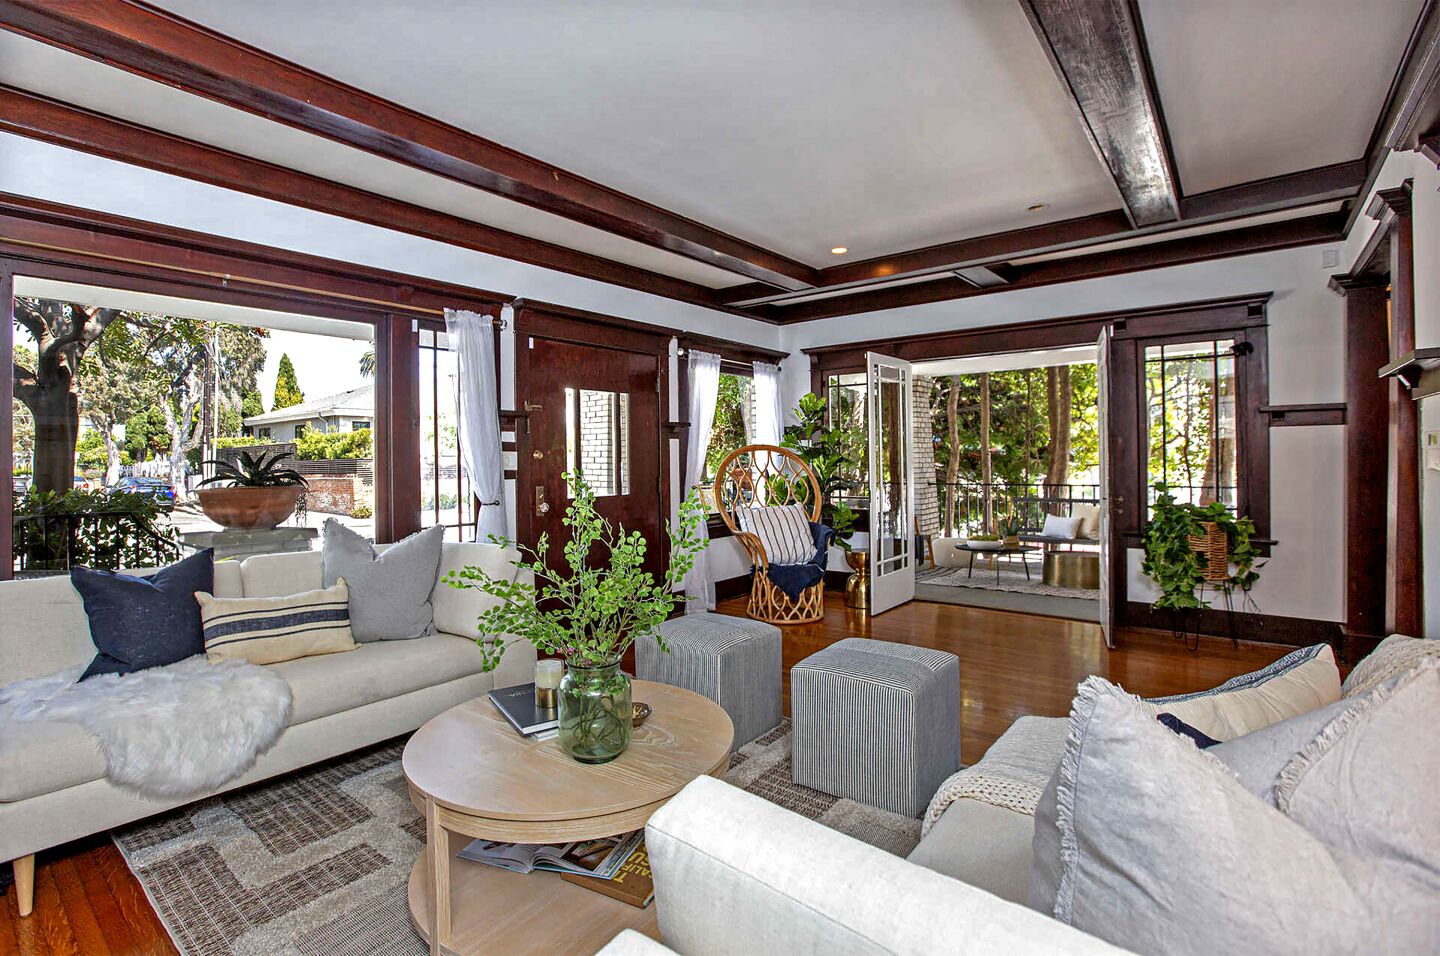 “SNL” veteran Will Forte sold his 107-year-old Craftsman for $2.475 million.